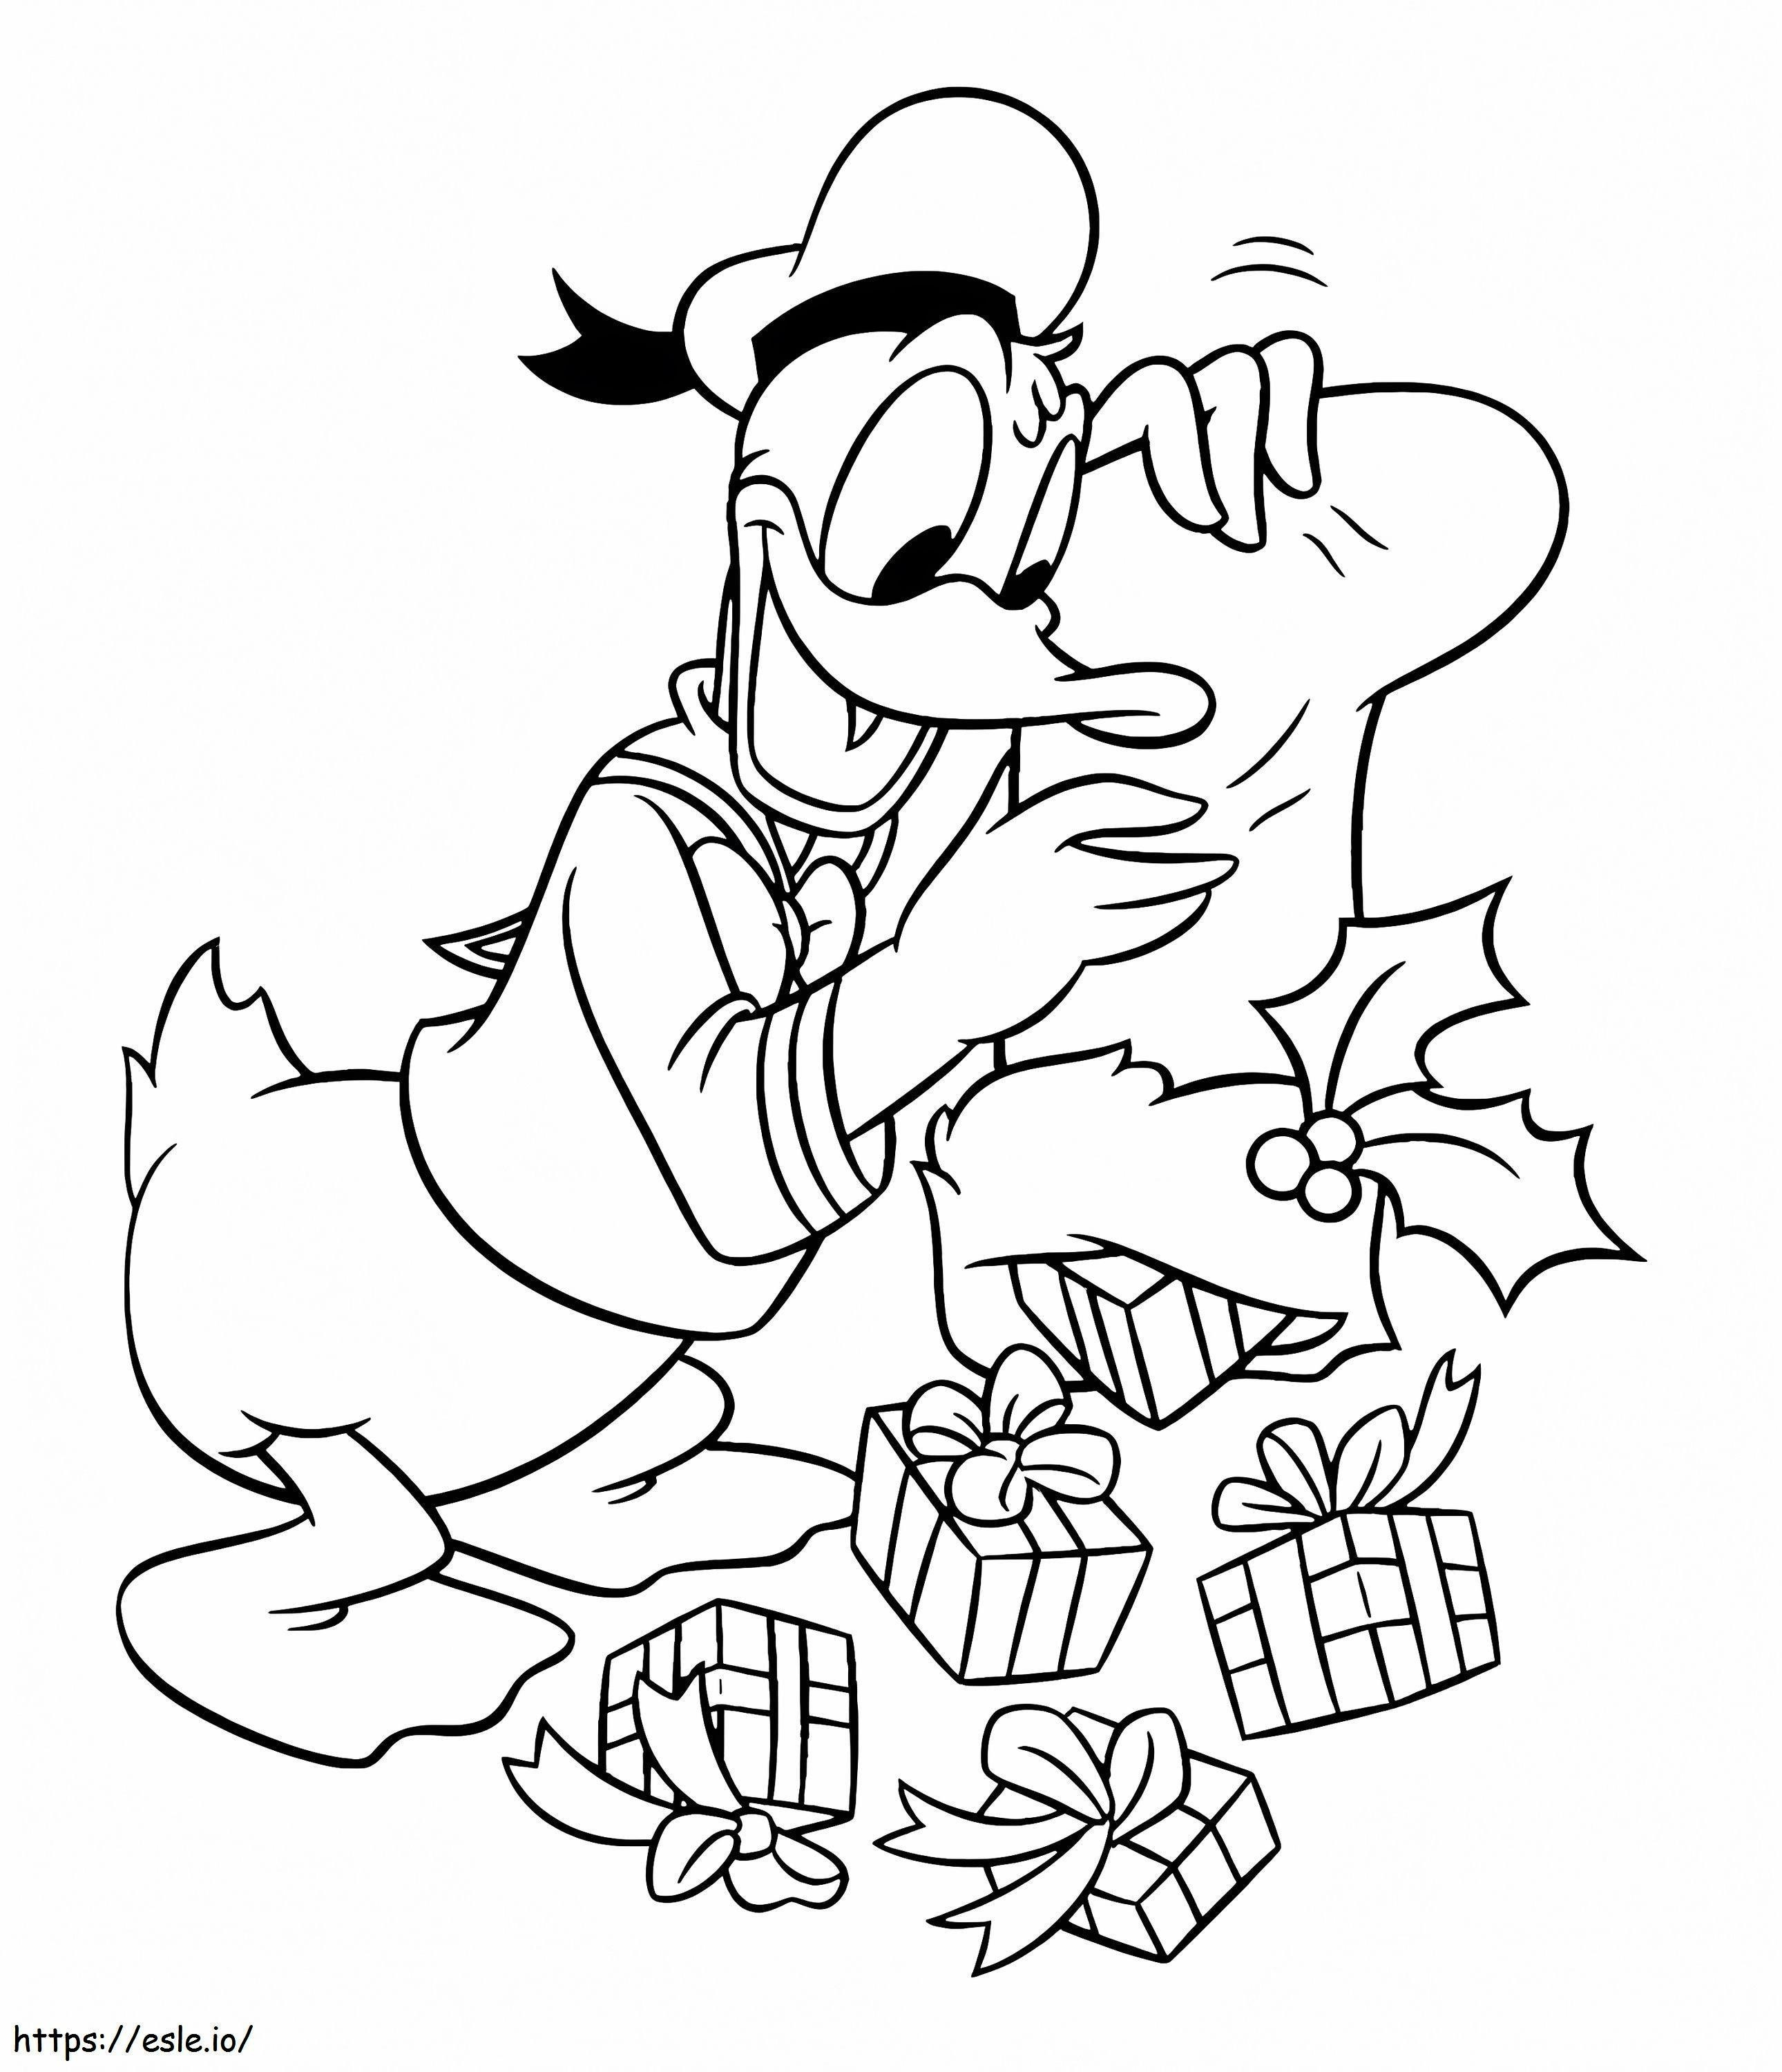 Donald Duck With Christmas Gifts coloring page